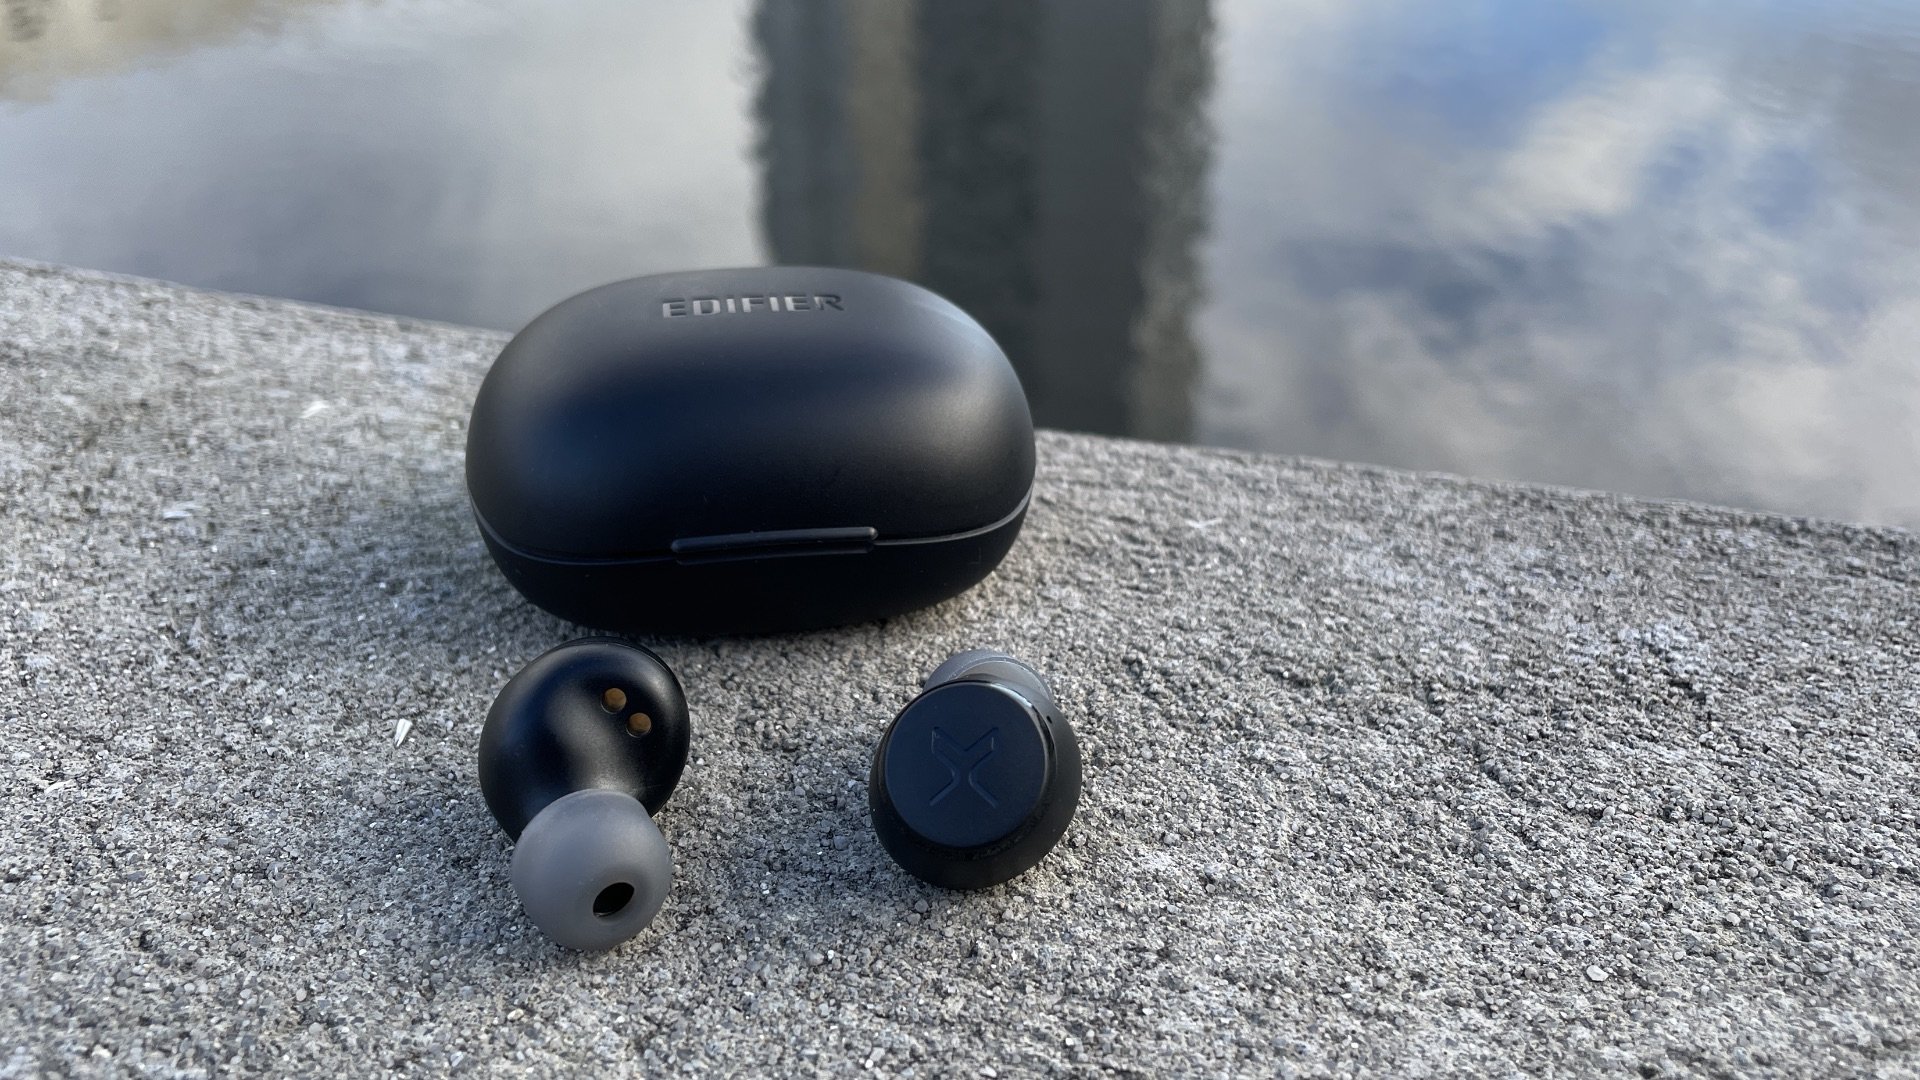 Redmi Buds 3 Lite review: Best cheap earbuds for sleeping